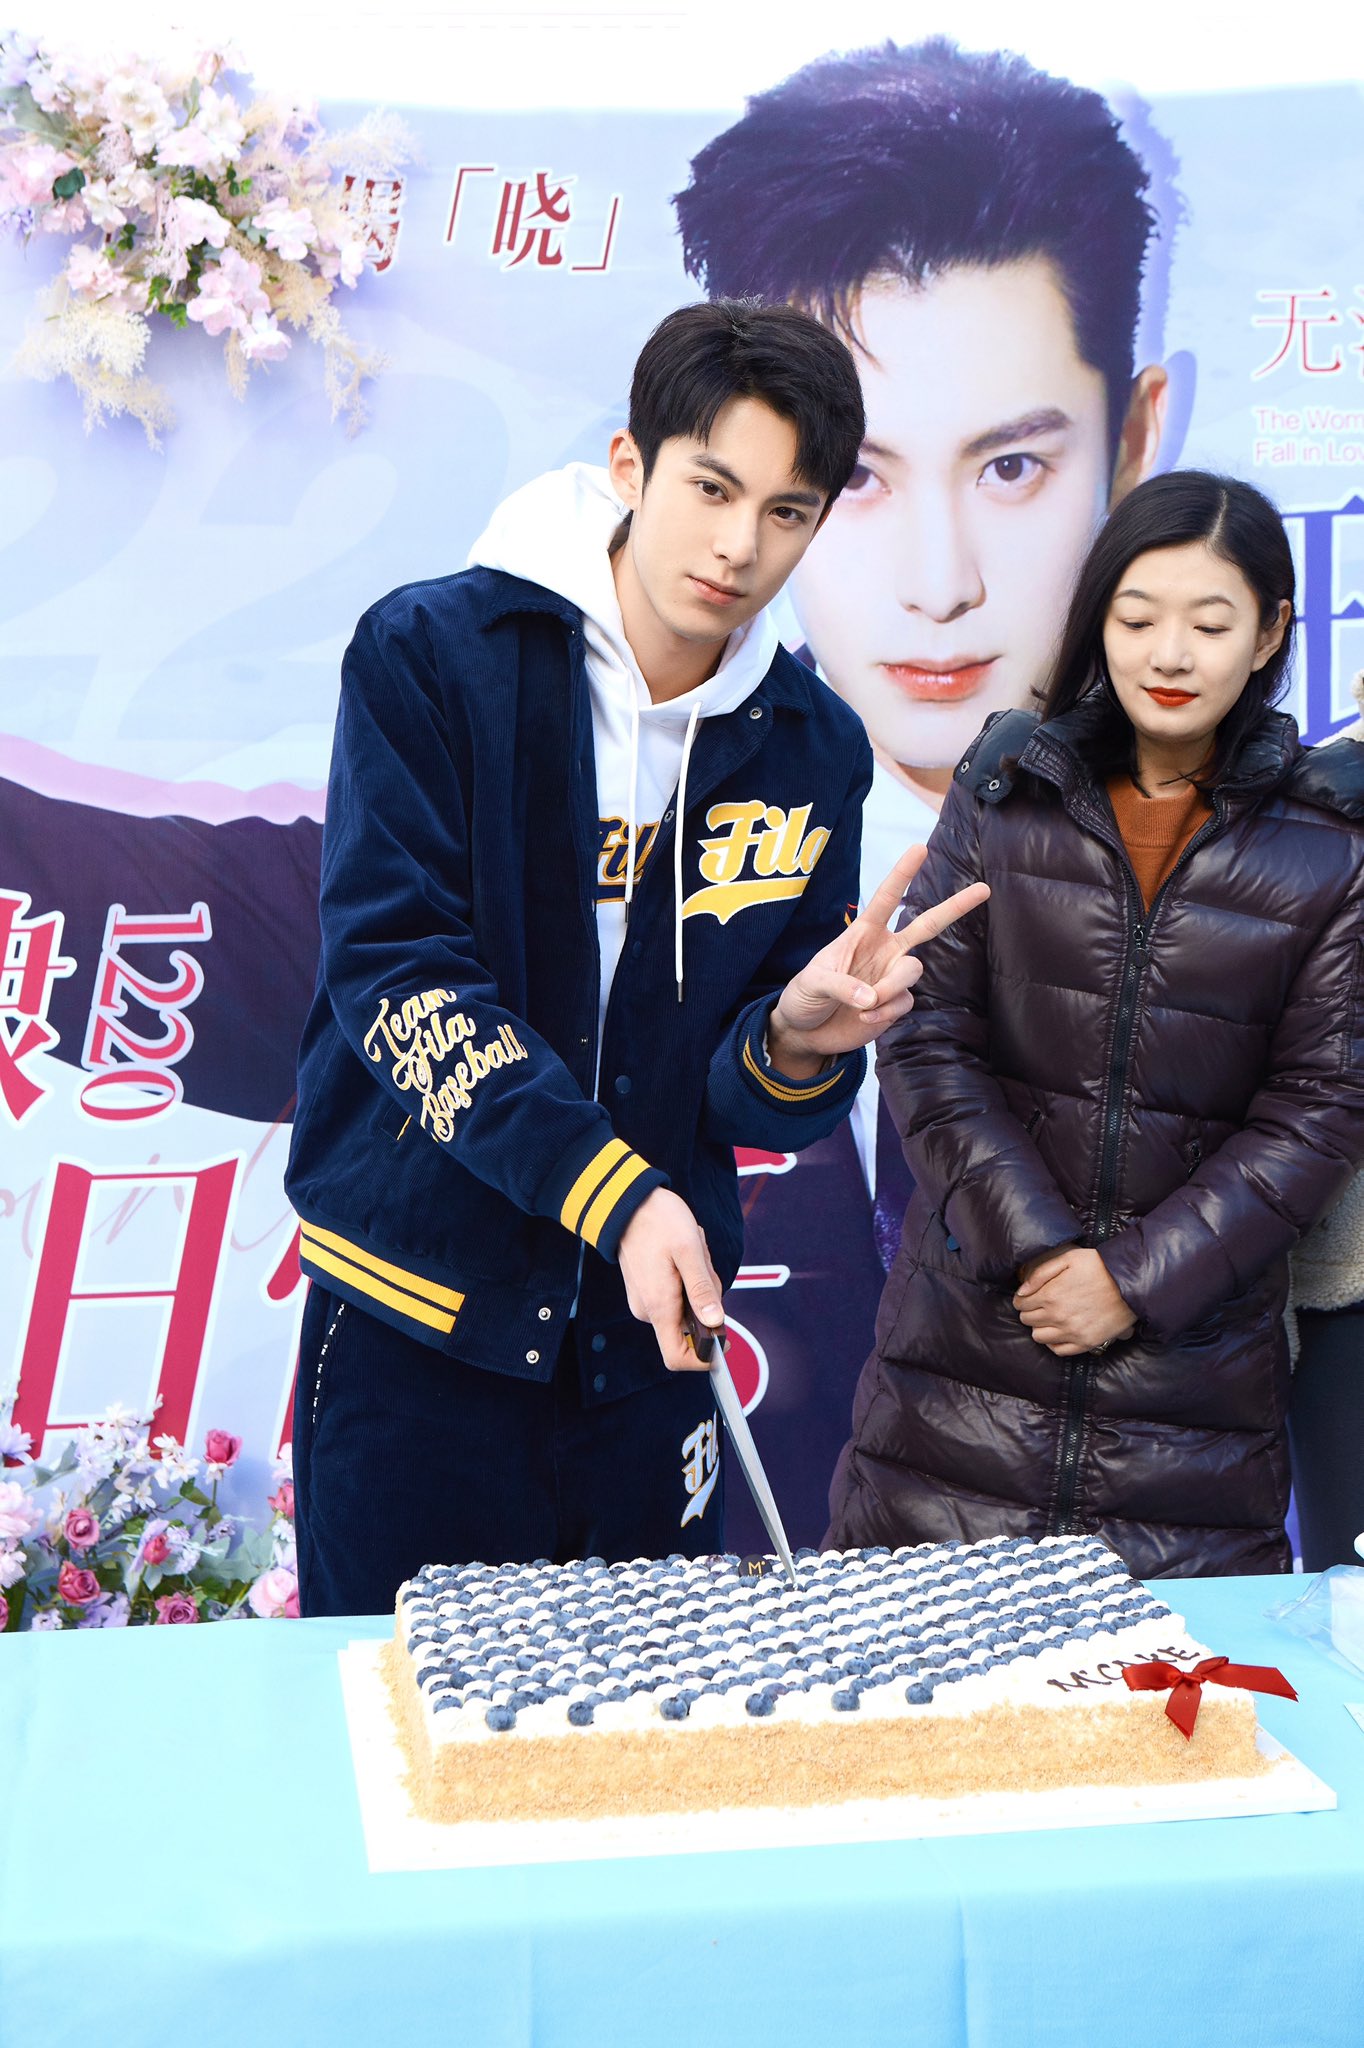 dylan wang archive 📂 on X: [📸] 12.03.2022  Dylan Wang Diary Weibo  Update with stills of hello saturday ✨ [#DYLANWANG #王鹤棣 #WANGHEDI]   / X